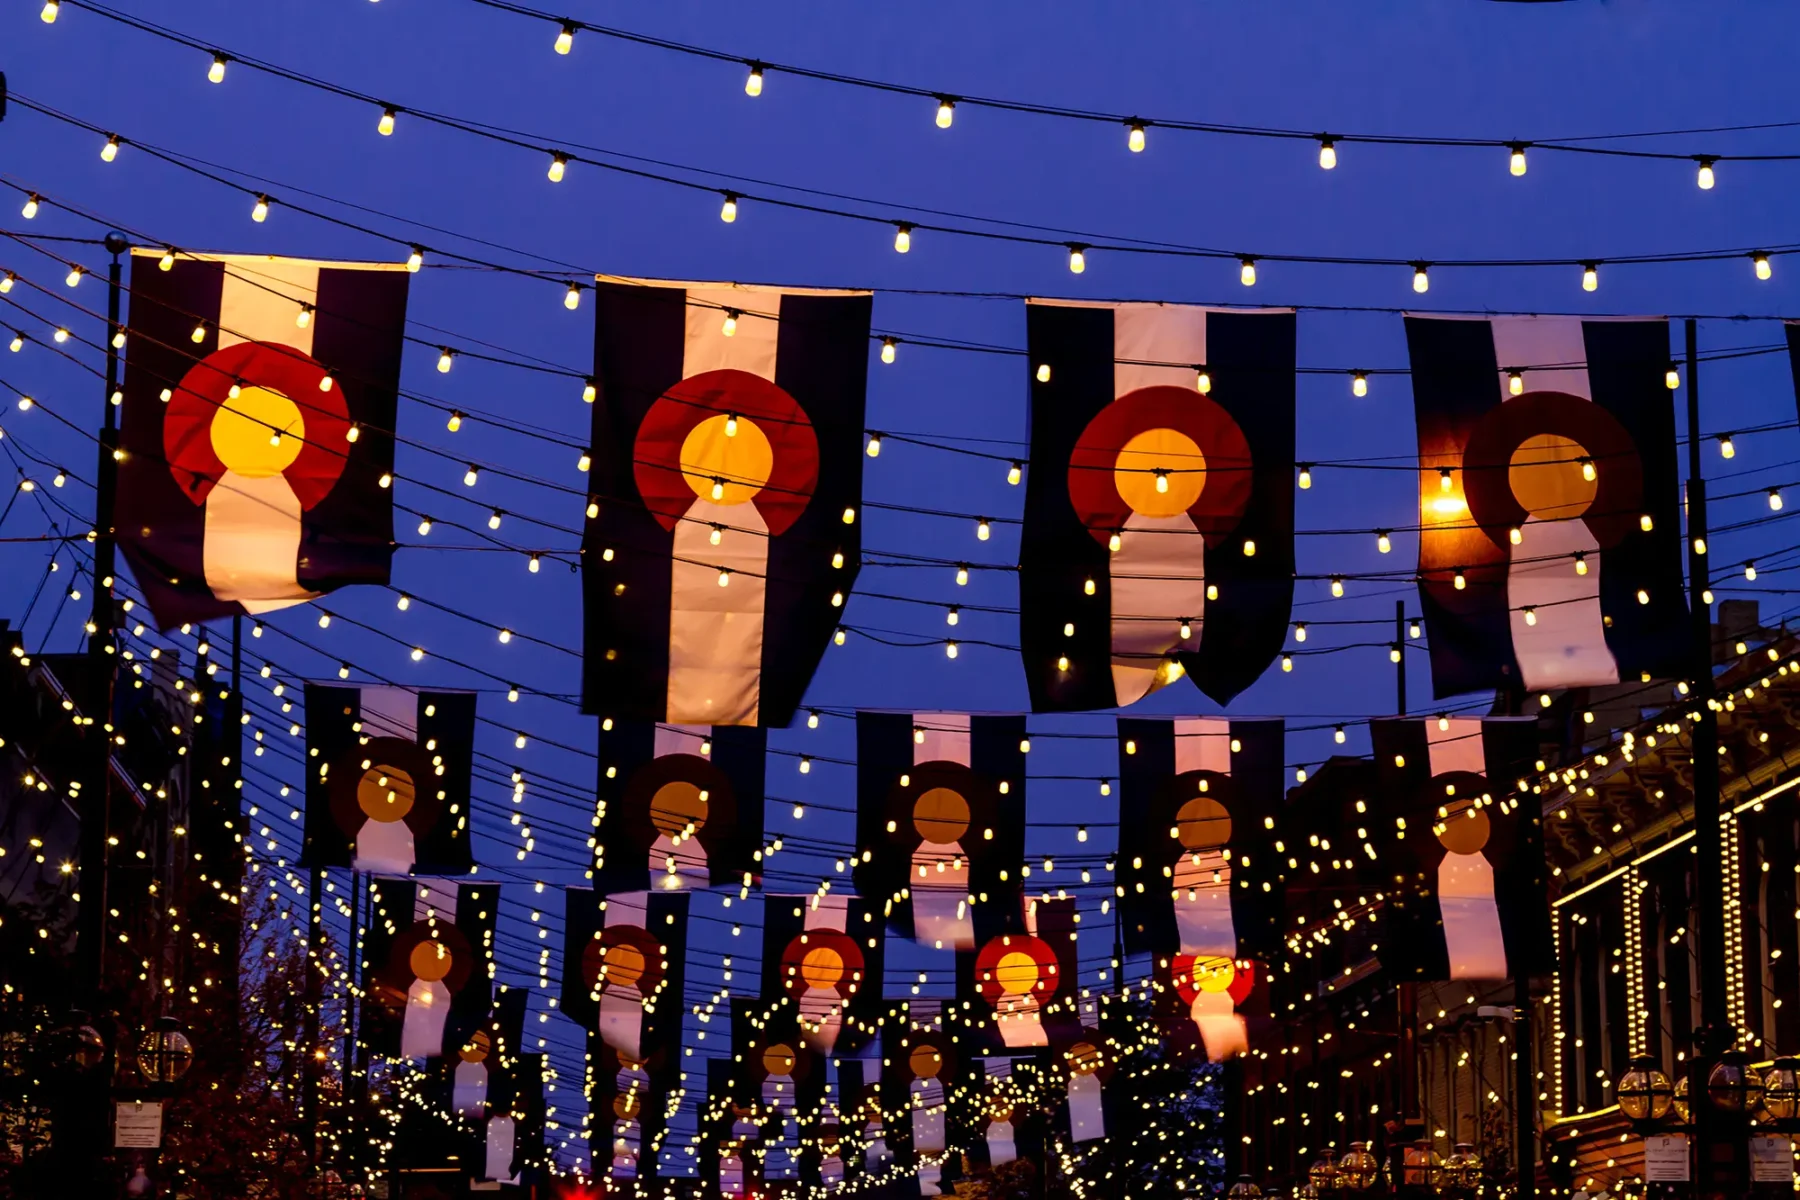 Street hung with string lights and Colorado flags